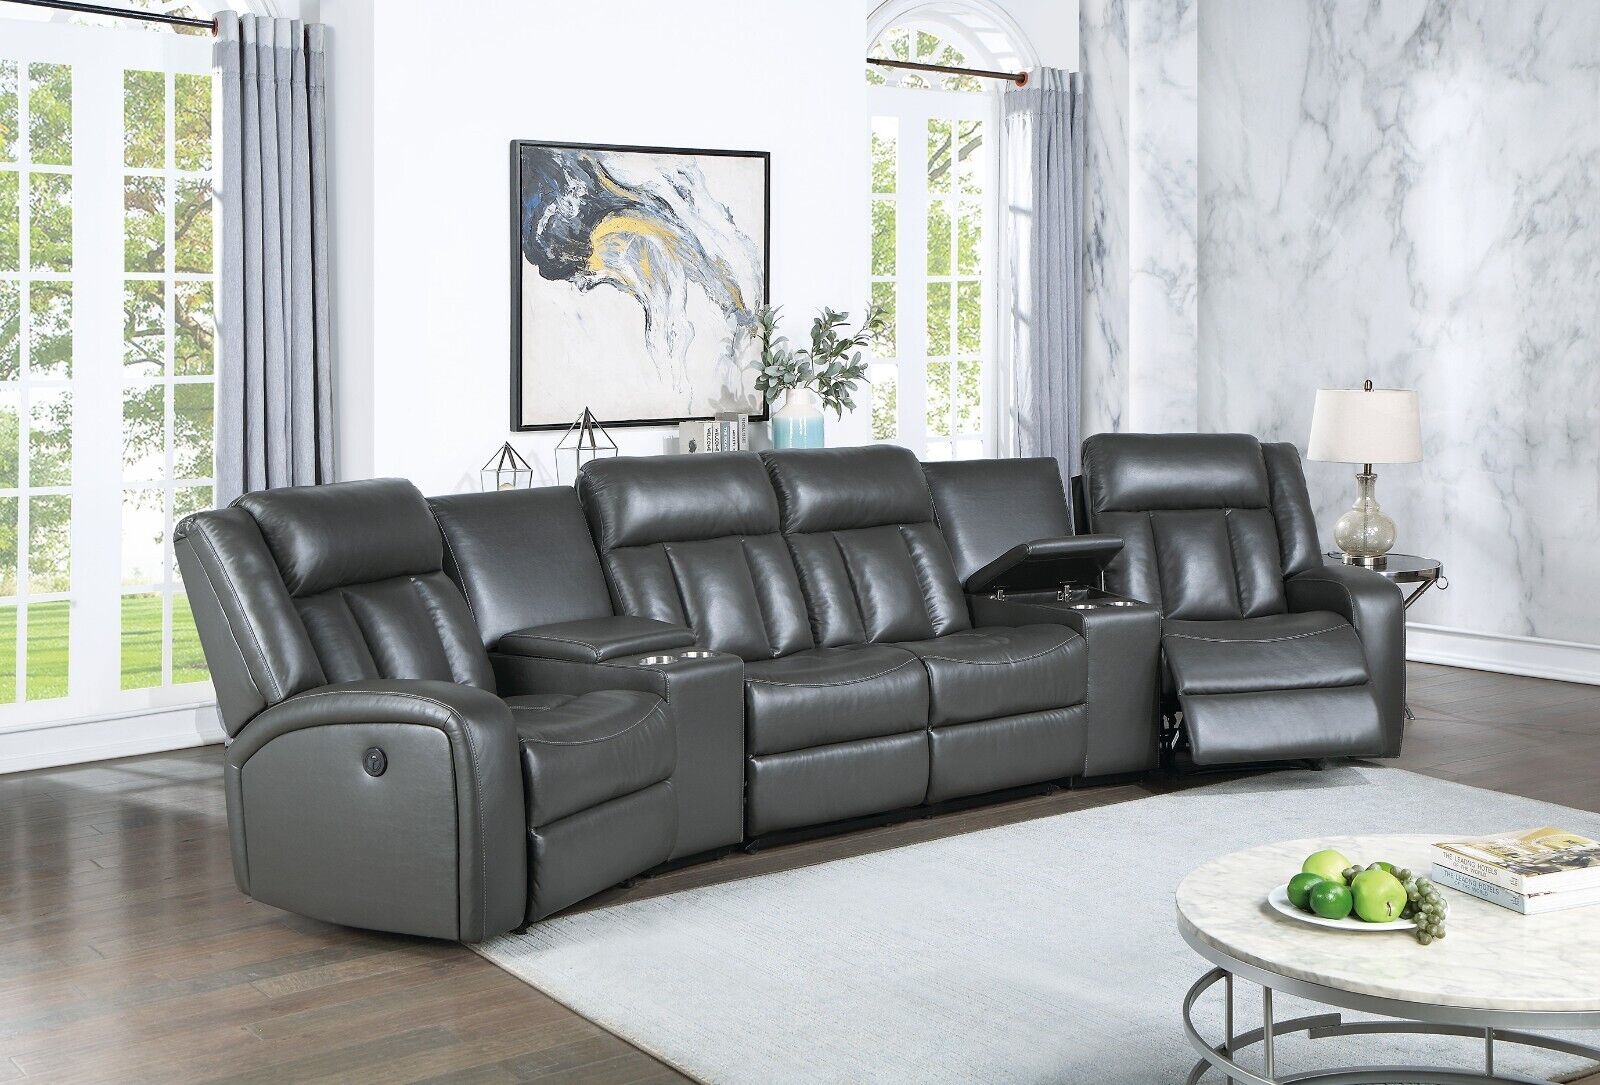 Esofastore Home Theater Sectional Power Reclining Couch Consoles Recliner Chairs Loveseat Gel Leatherette Gray Living Room Furniture